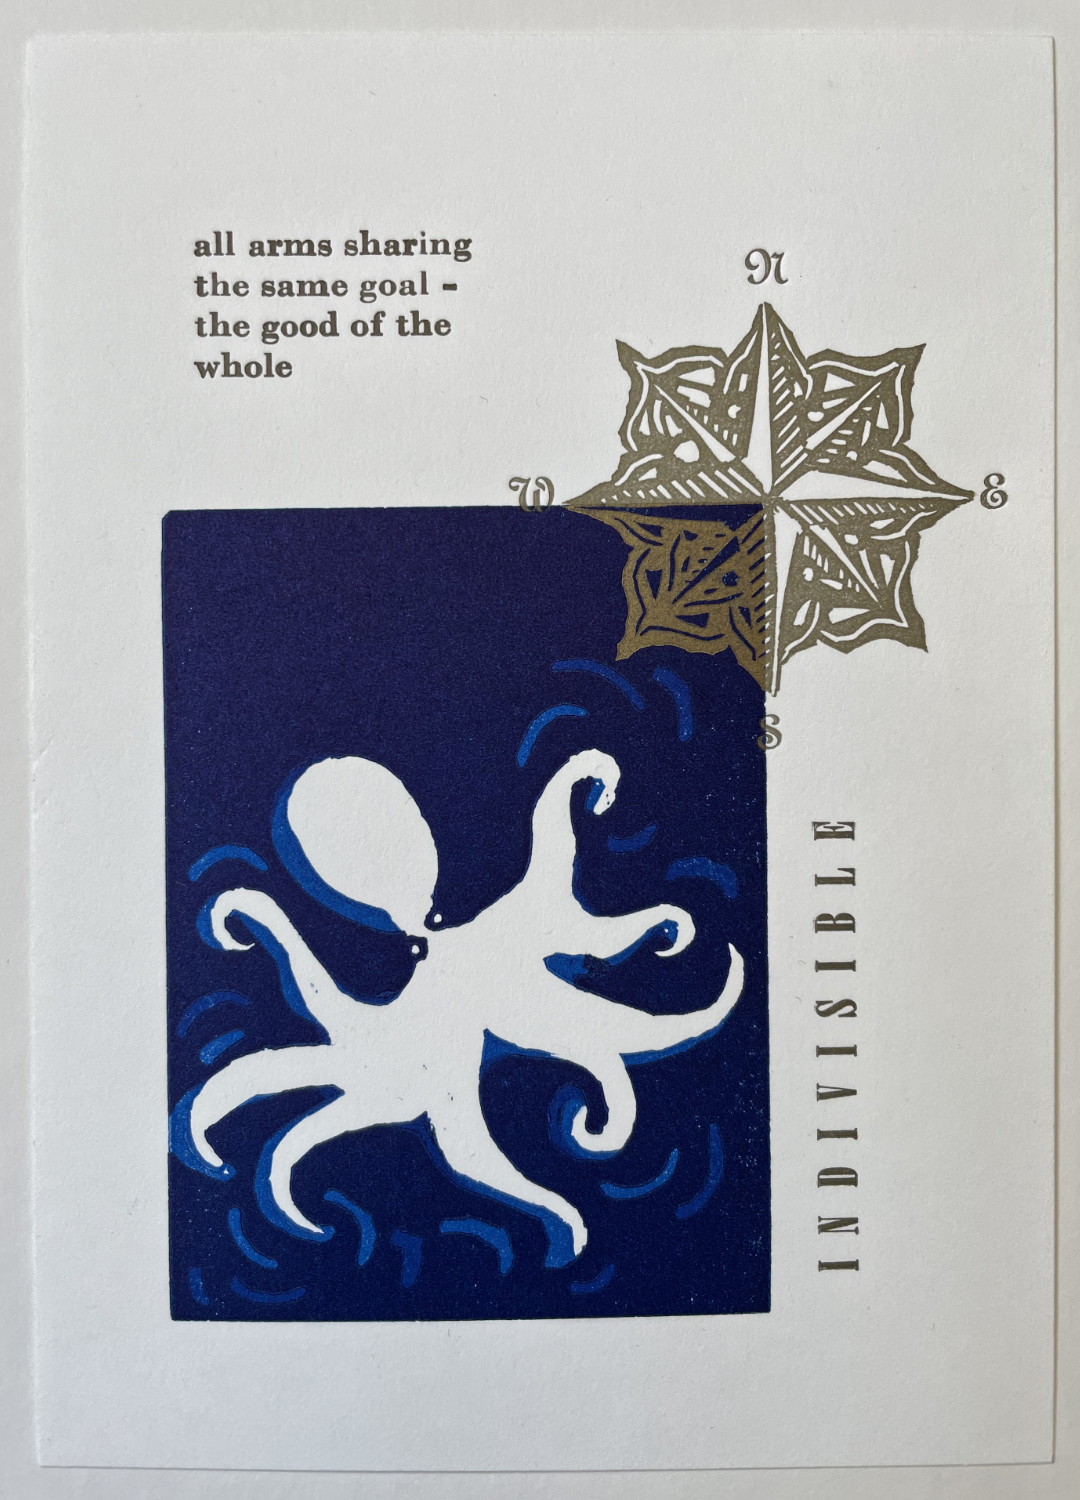 linocut of octopus and compass rose with text that says indivisible all arms sharing the same goal the good of the whole